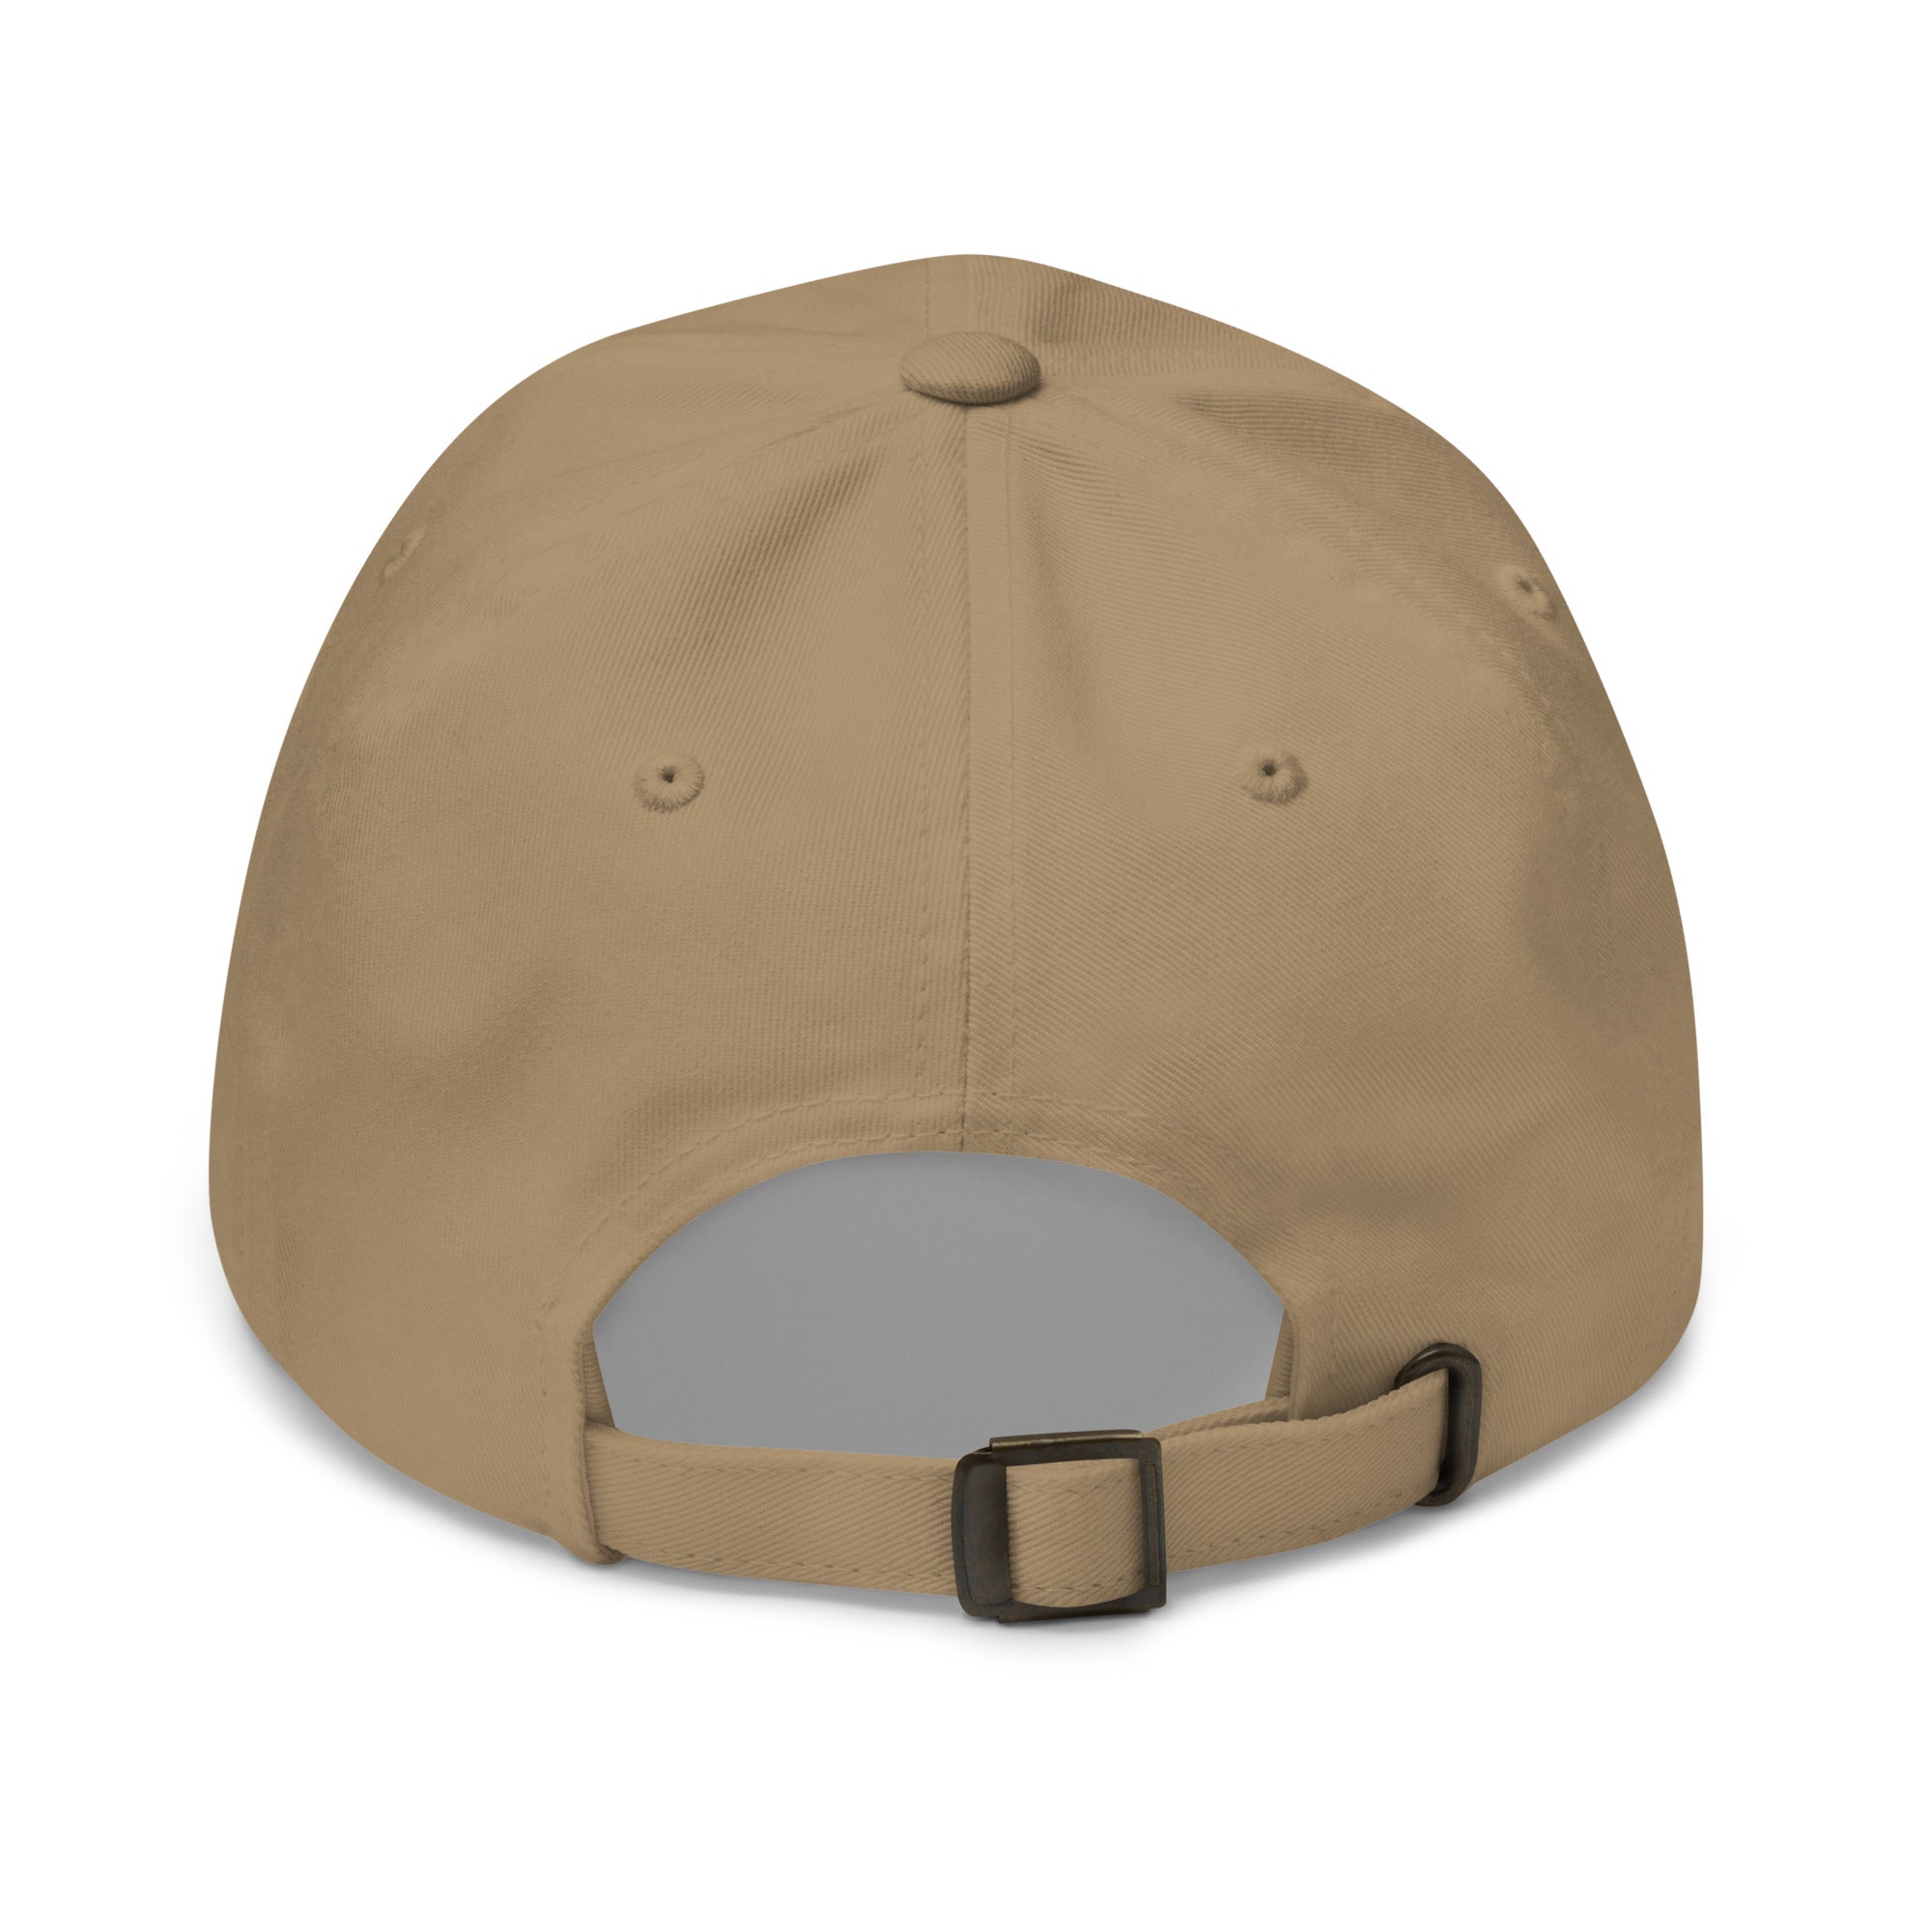 Bitcoin Accessories - The Bitcoin Dominance Hat has an adjustable buckle strapback. Color: Khaki. Back view.